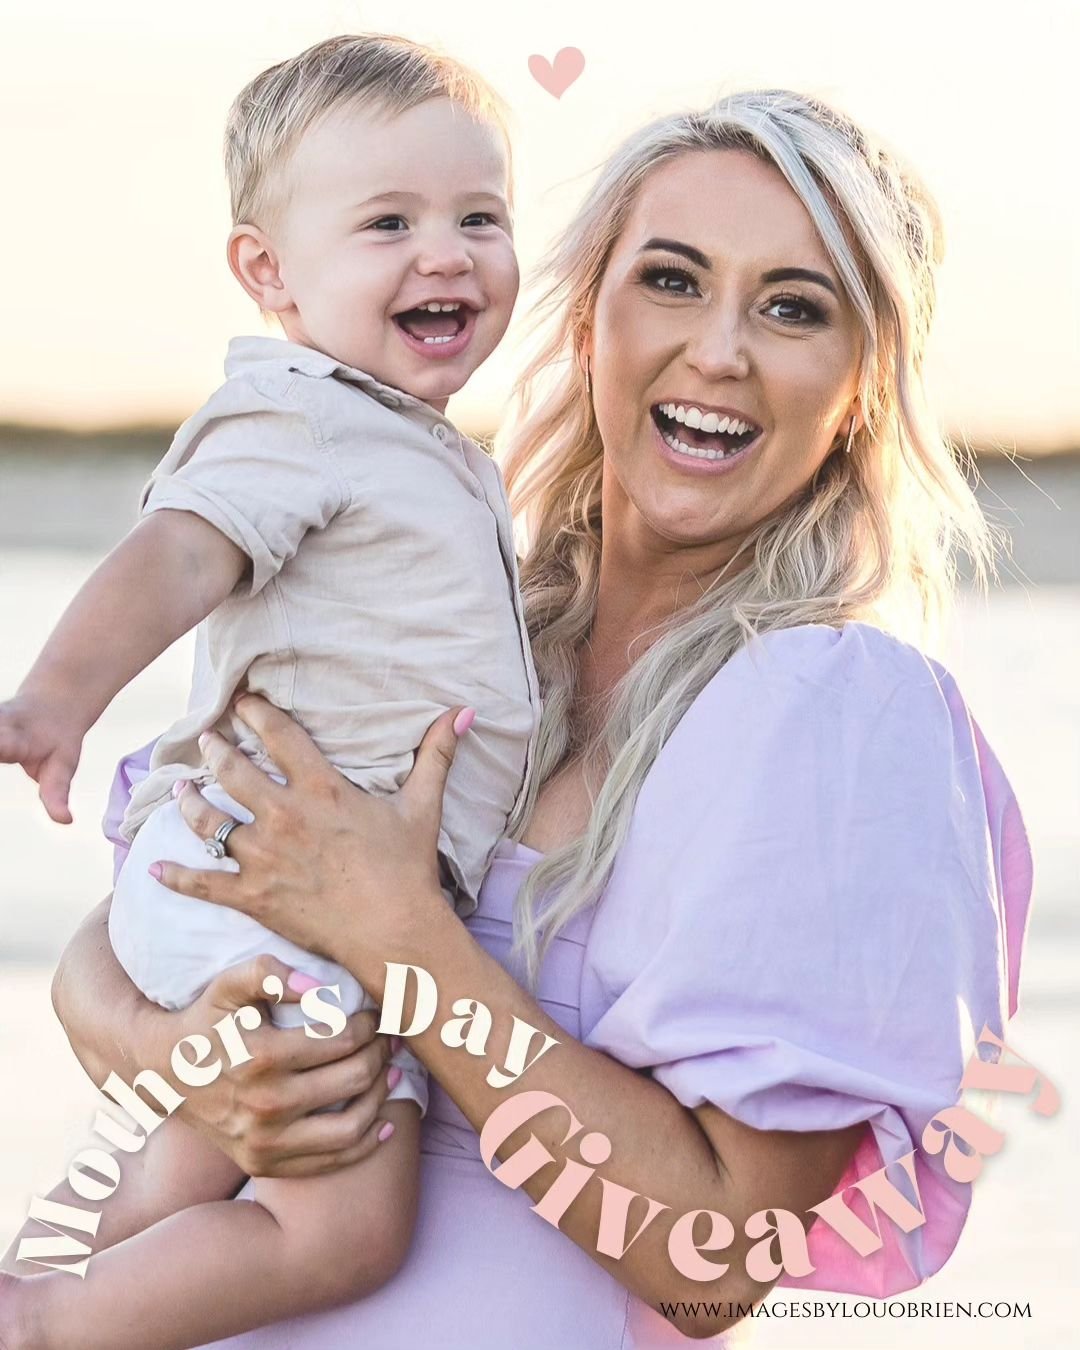 With Mother's Day just around the corner, I've got something super special for you and your precious bubs! As a fellow mum, I know how incredible it is to cherish every moment with our little ones. But let's be real, most of the time, we're the ones 